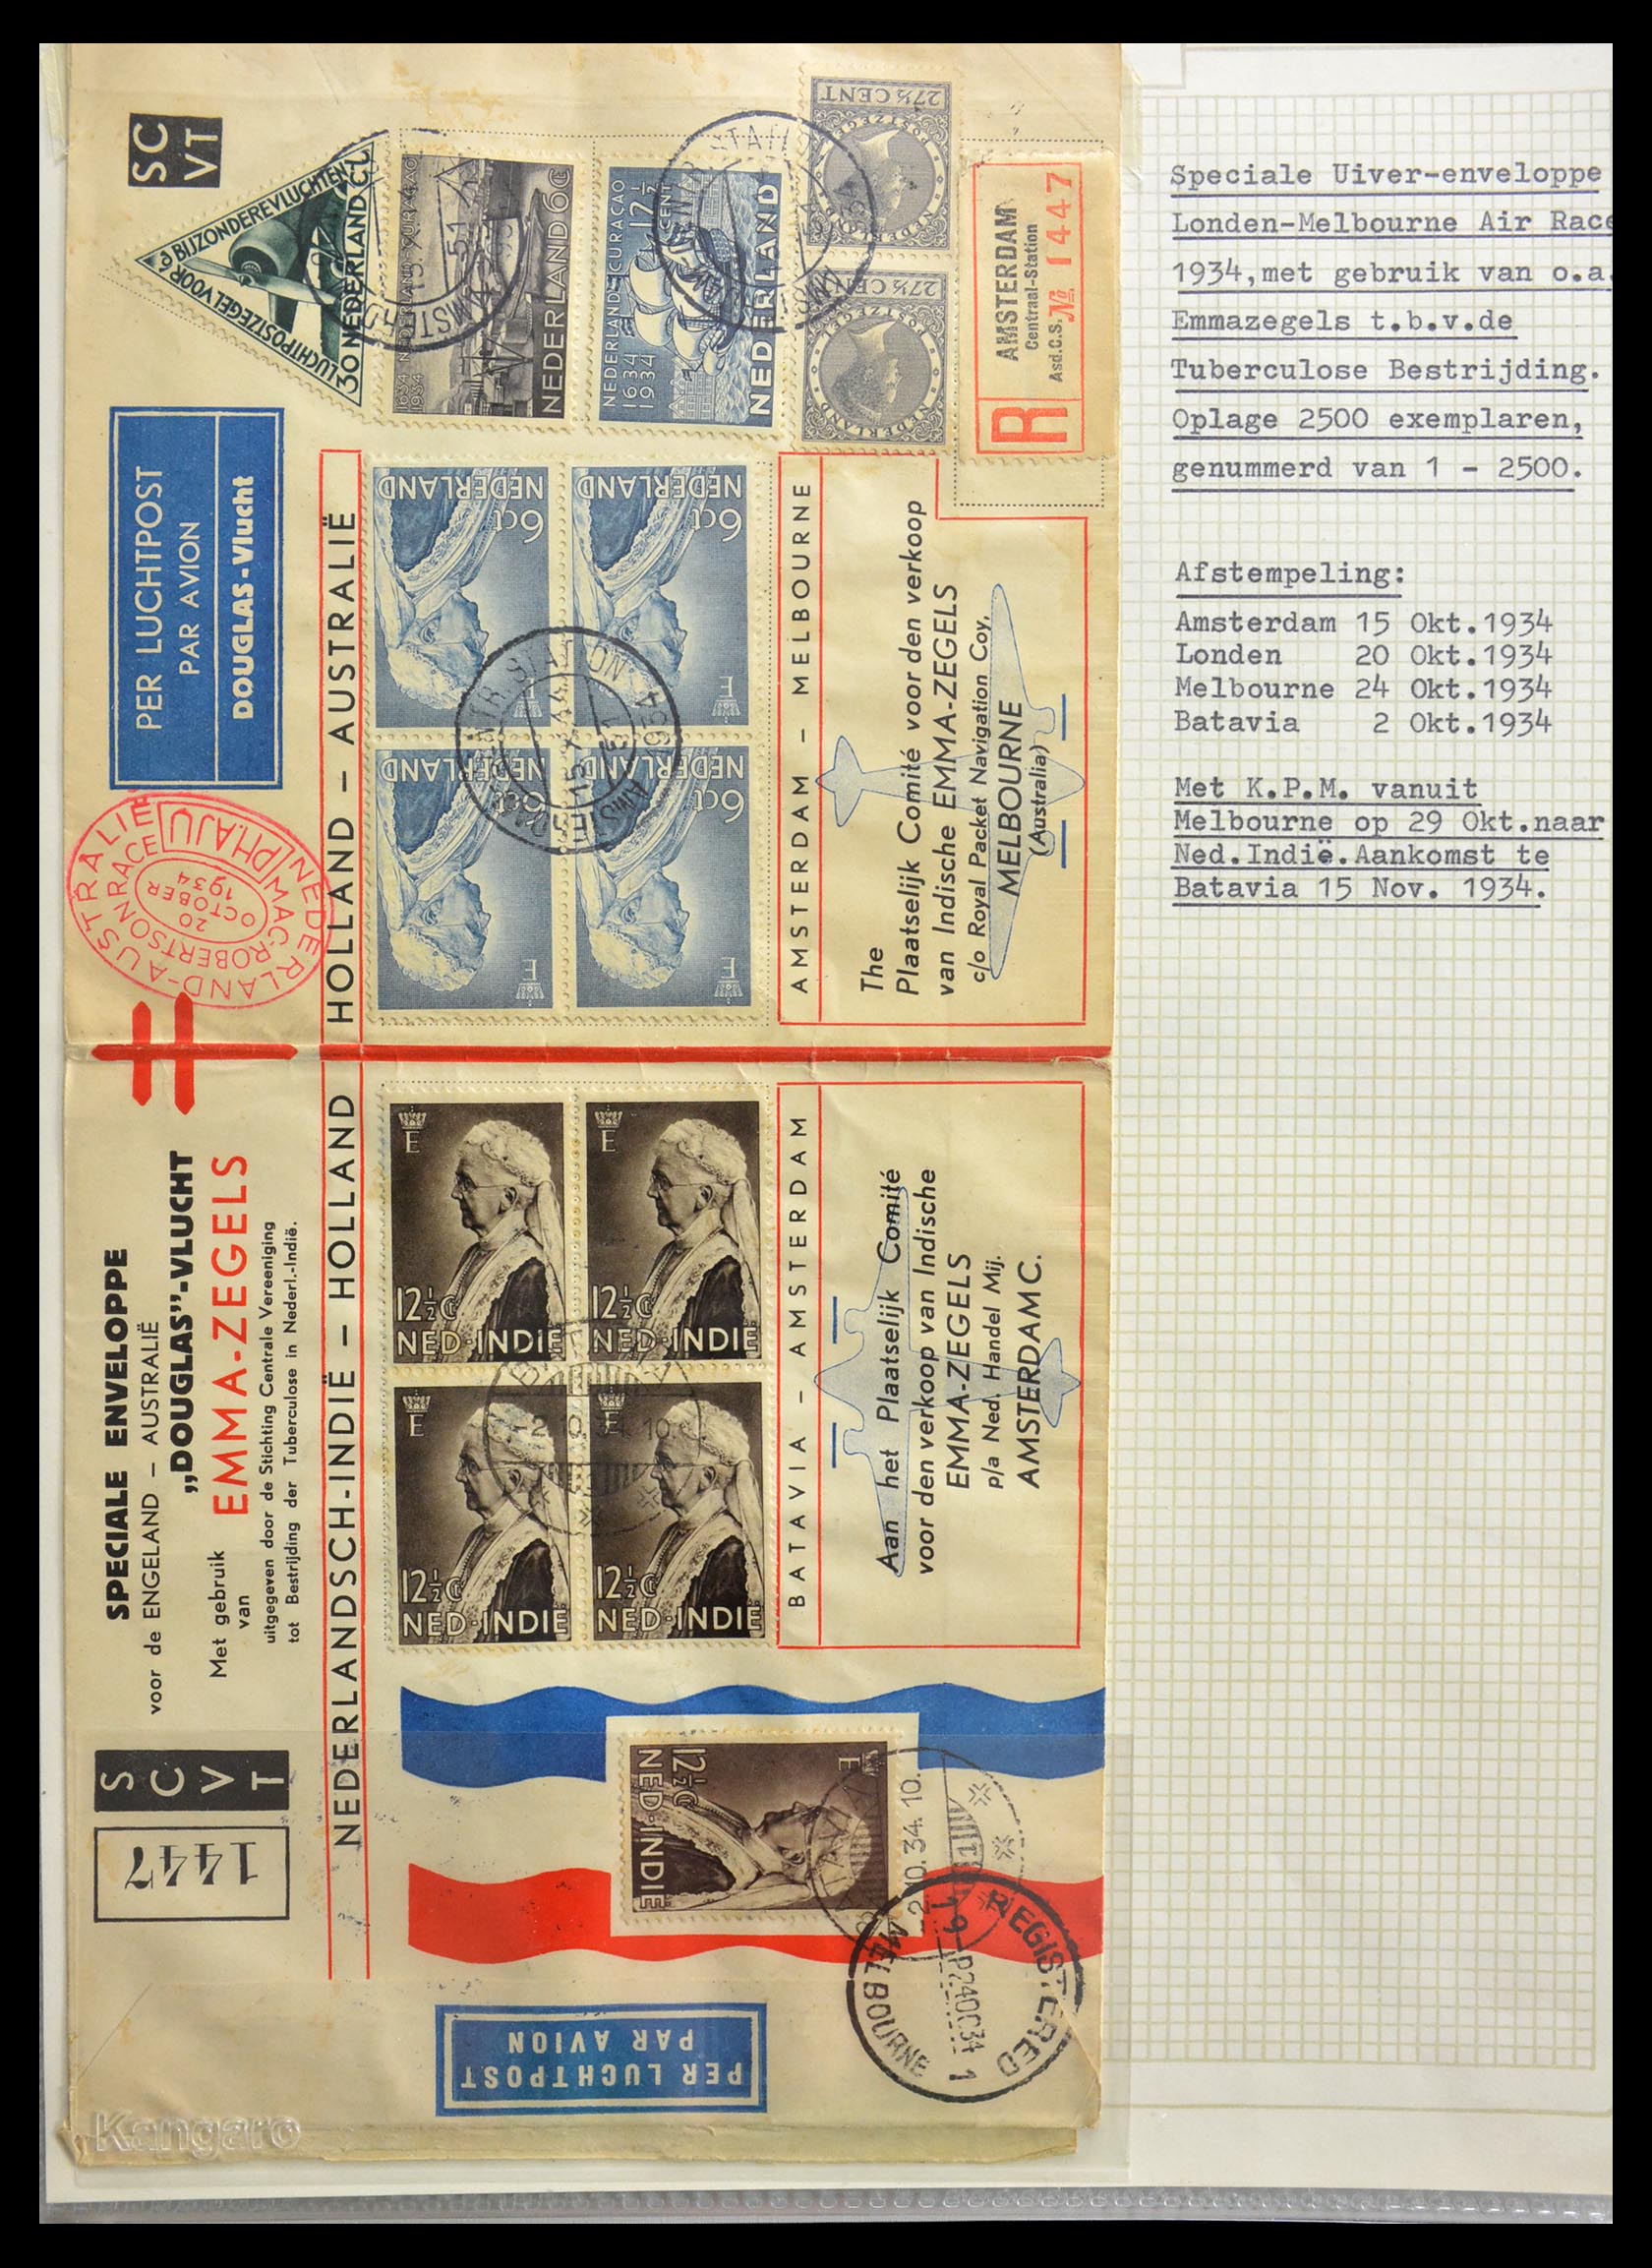 29087 004 - 29087 Netherlands airmail covers 1933-1953.